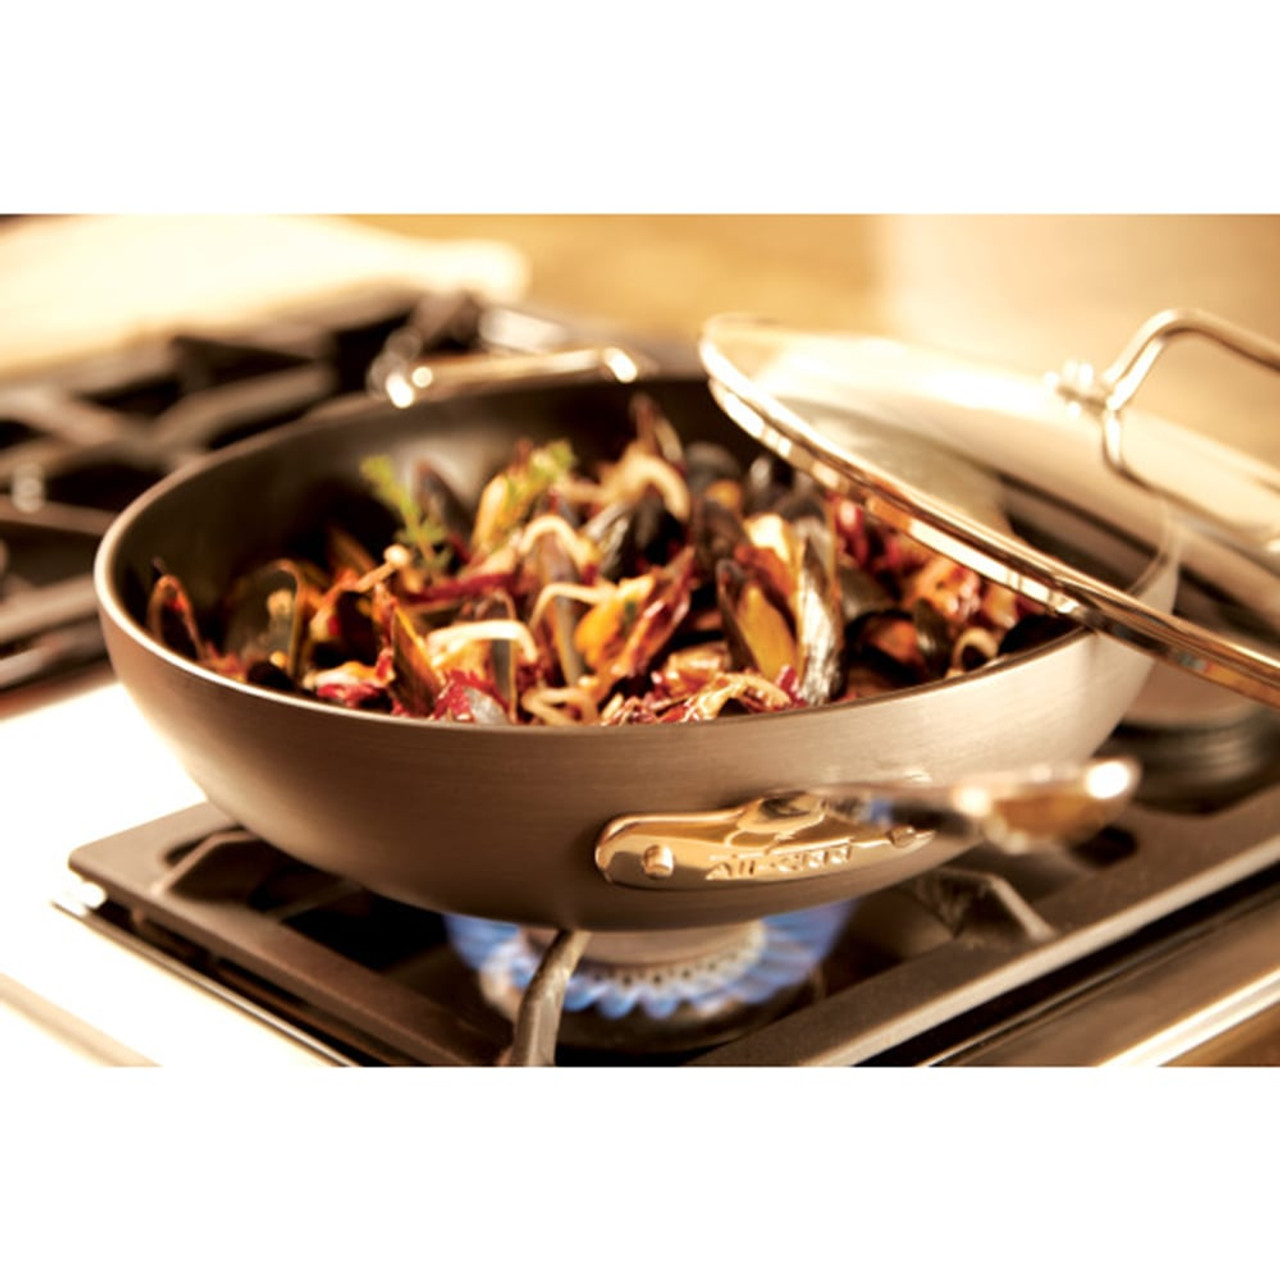 All-Clad HA1 Hard Anodized Nonstick Cookware, Fry Pan with lid, 12 inch